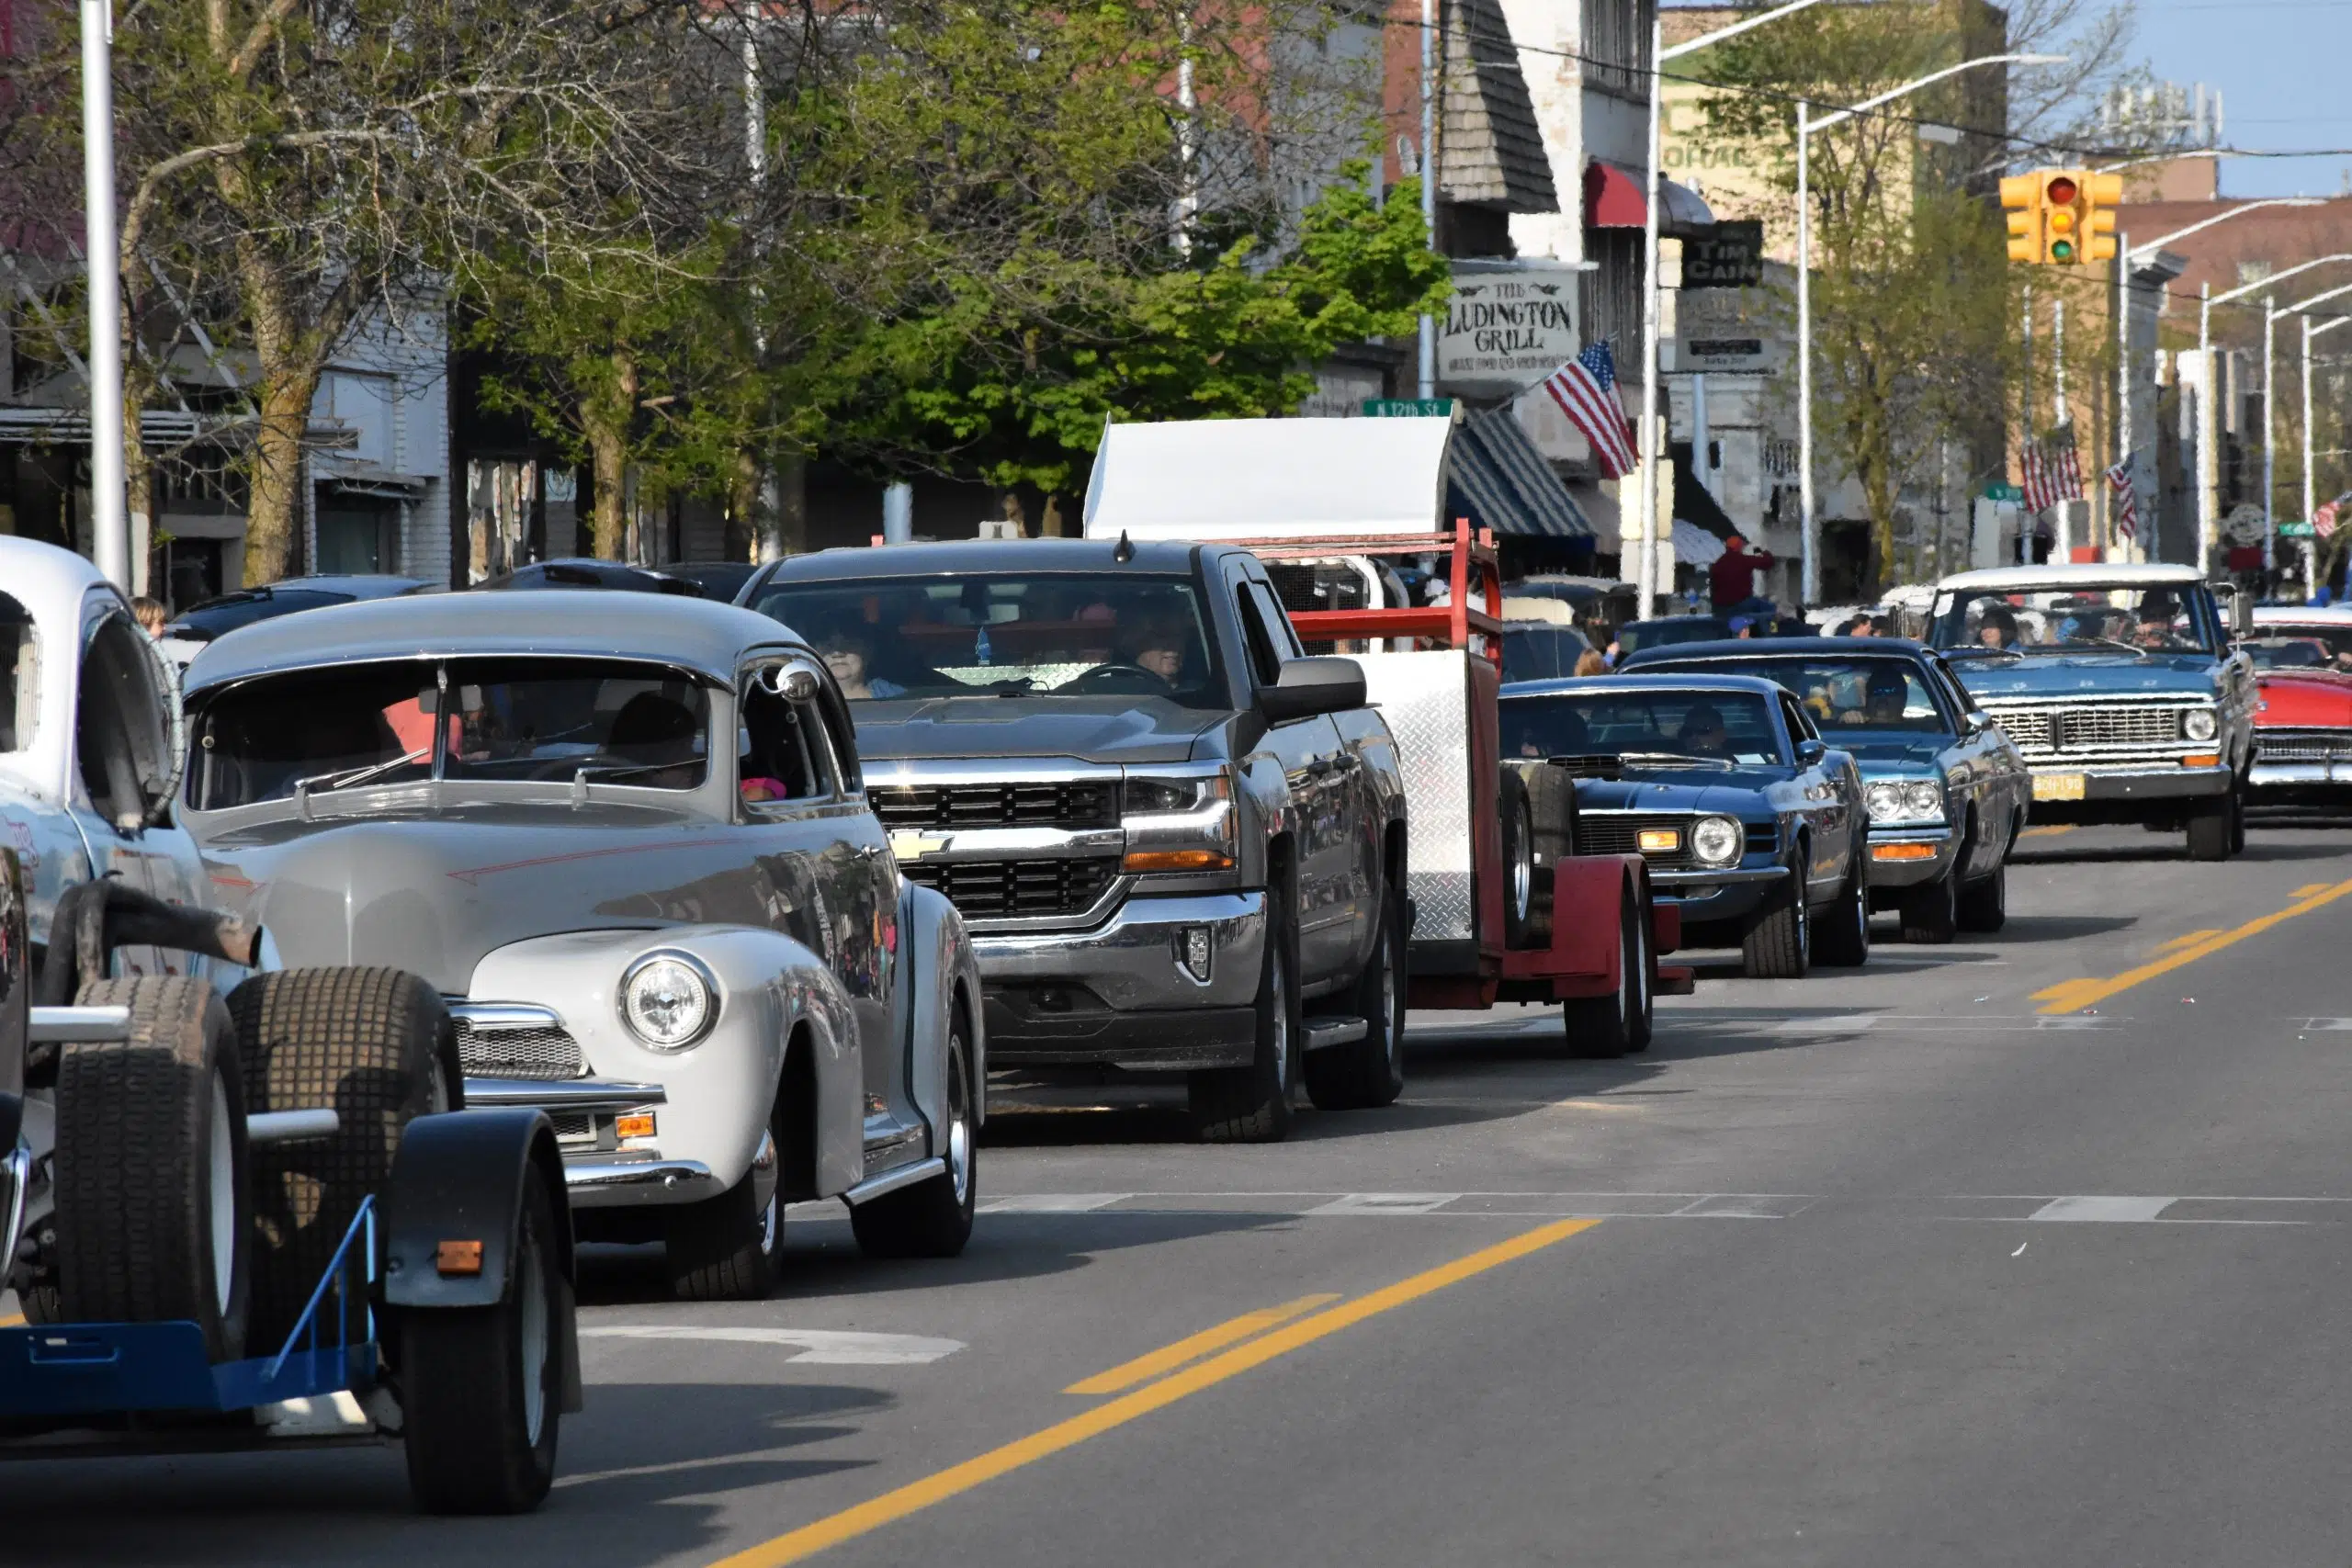 Hundreds Turn Out For Fun Run Parade In Escanaba